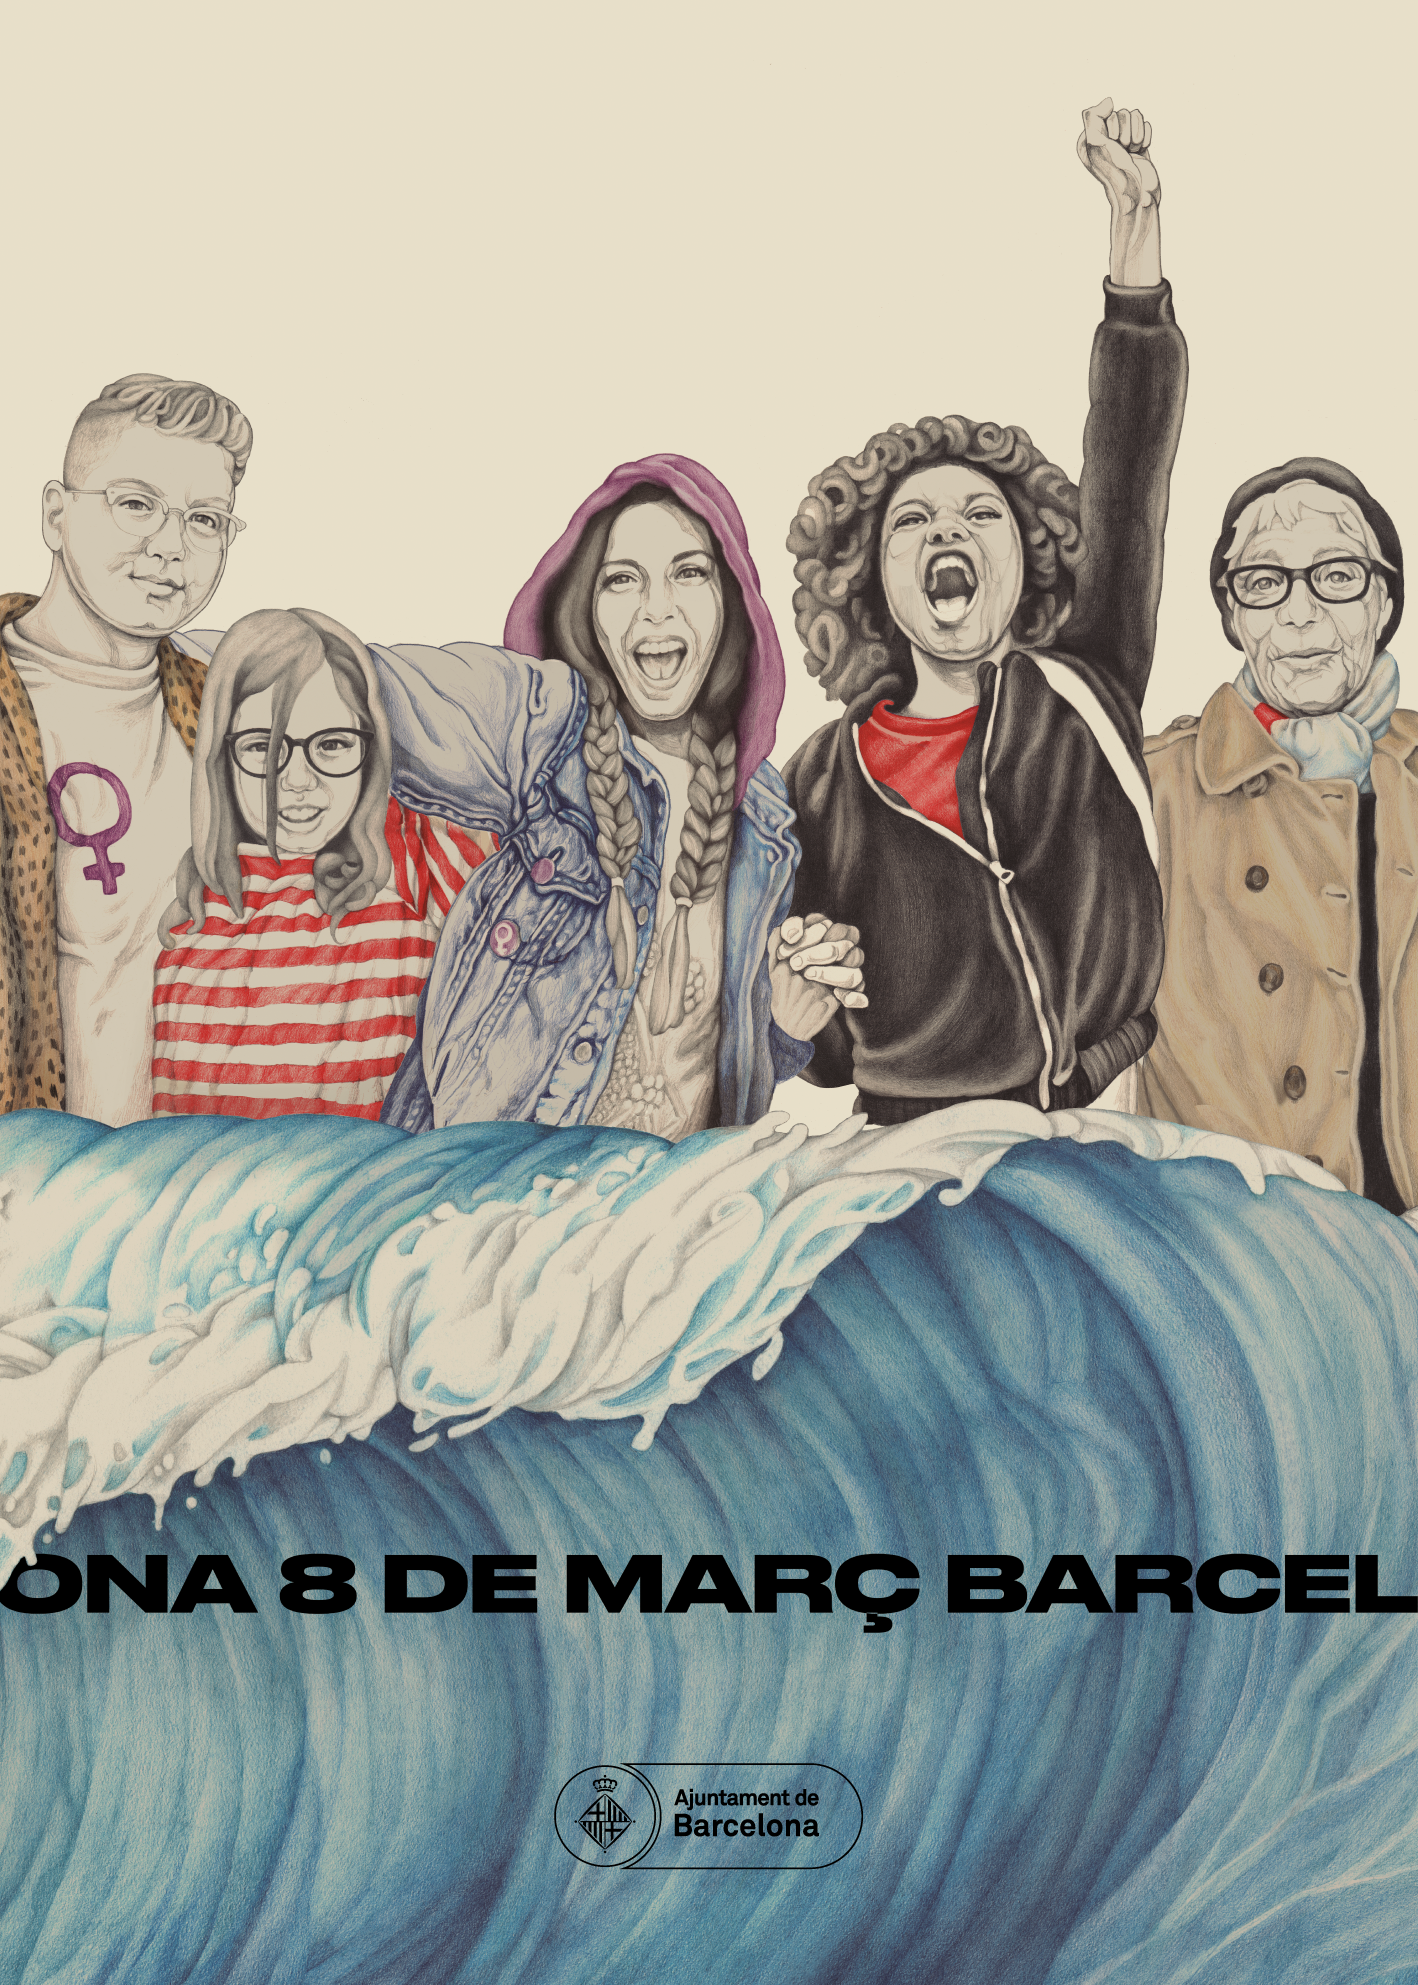 Poster showing a group of women walking together behind a wave, representing a demonstration, with the text “8 March, Barcelona”. Barcelona City Council. 